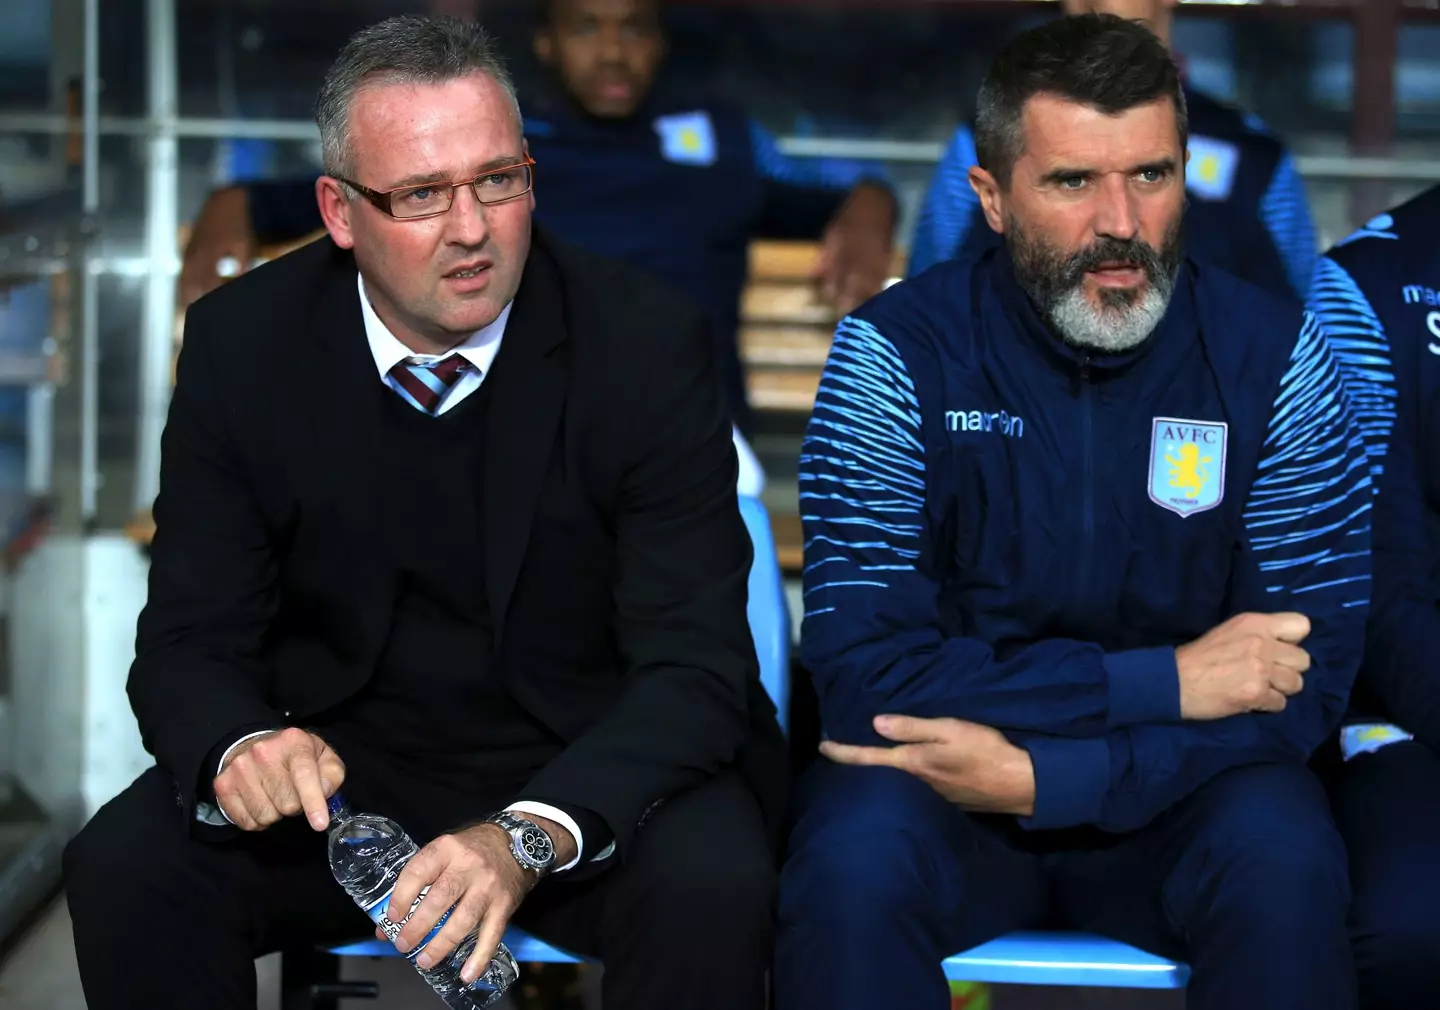 Keane was Lambert's assistant for four months. Image: PA Images